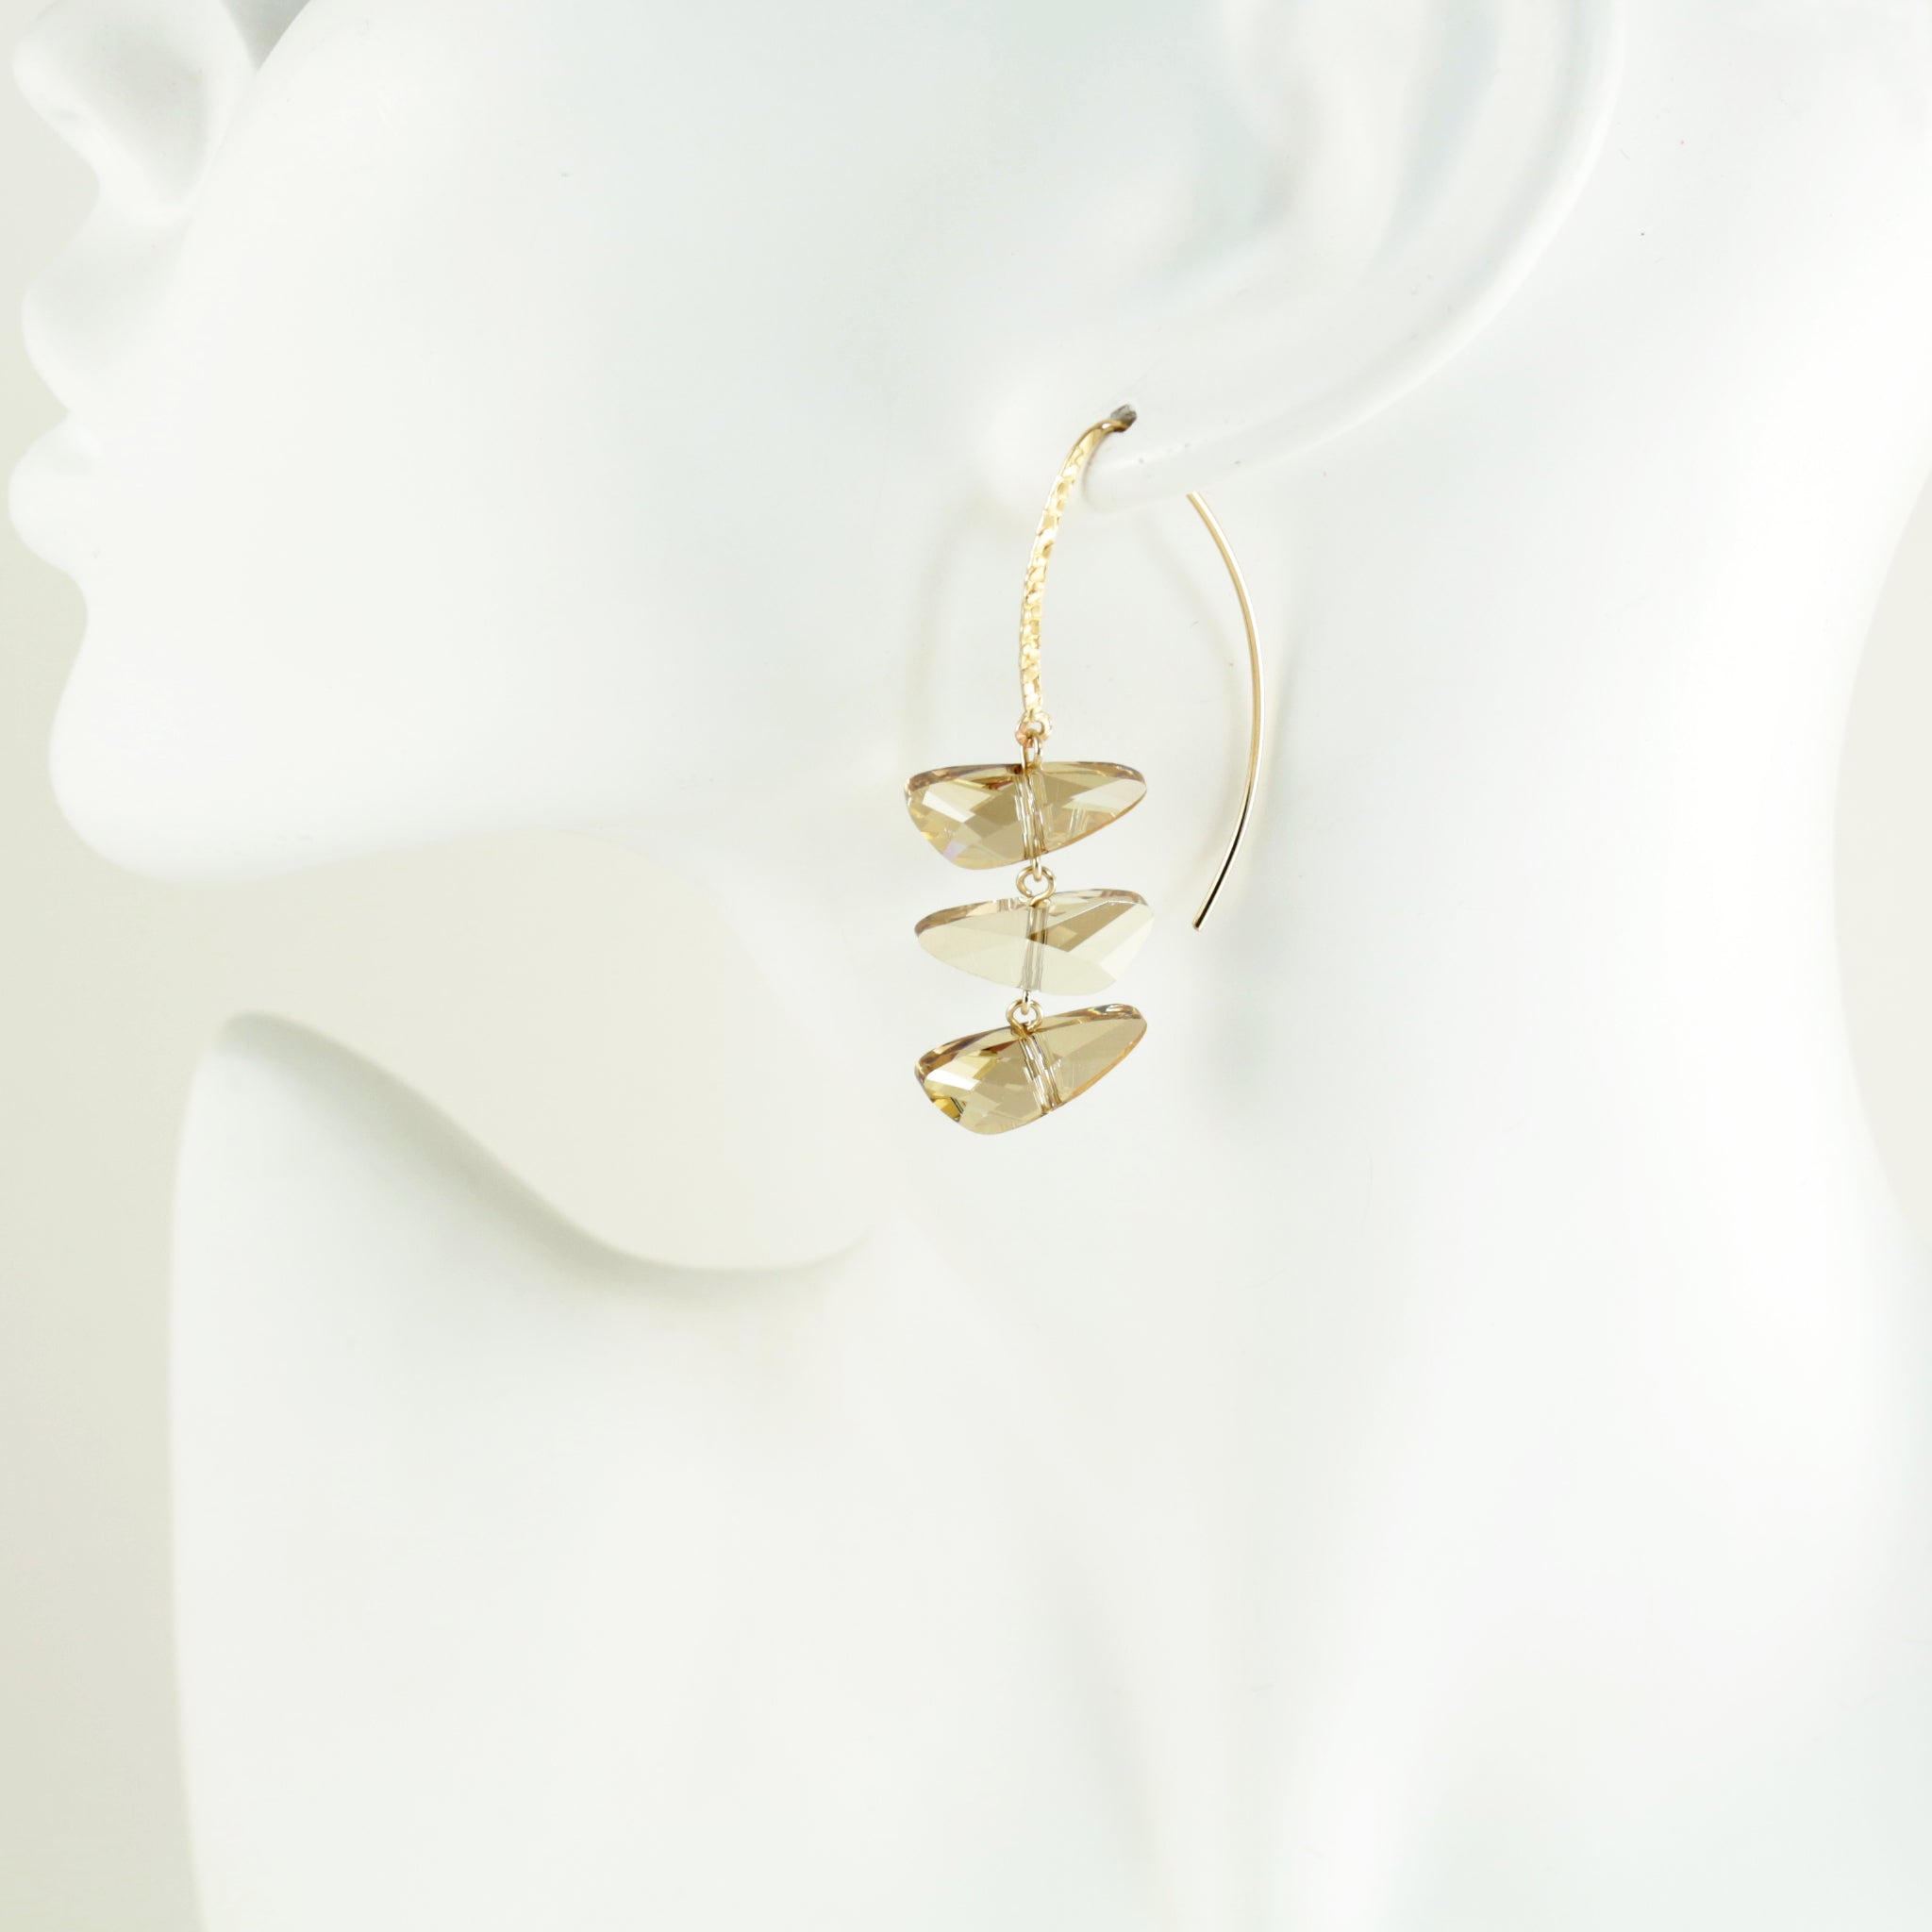 Reflections Earrings in Gold Shimmer